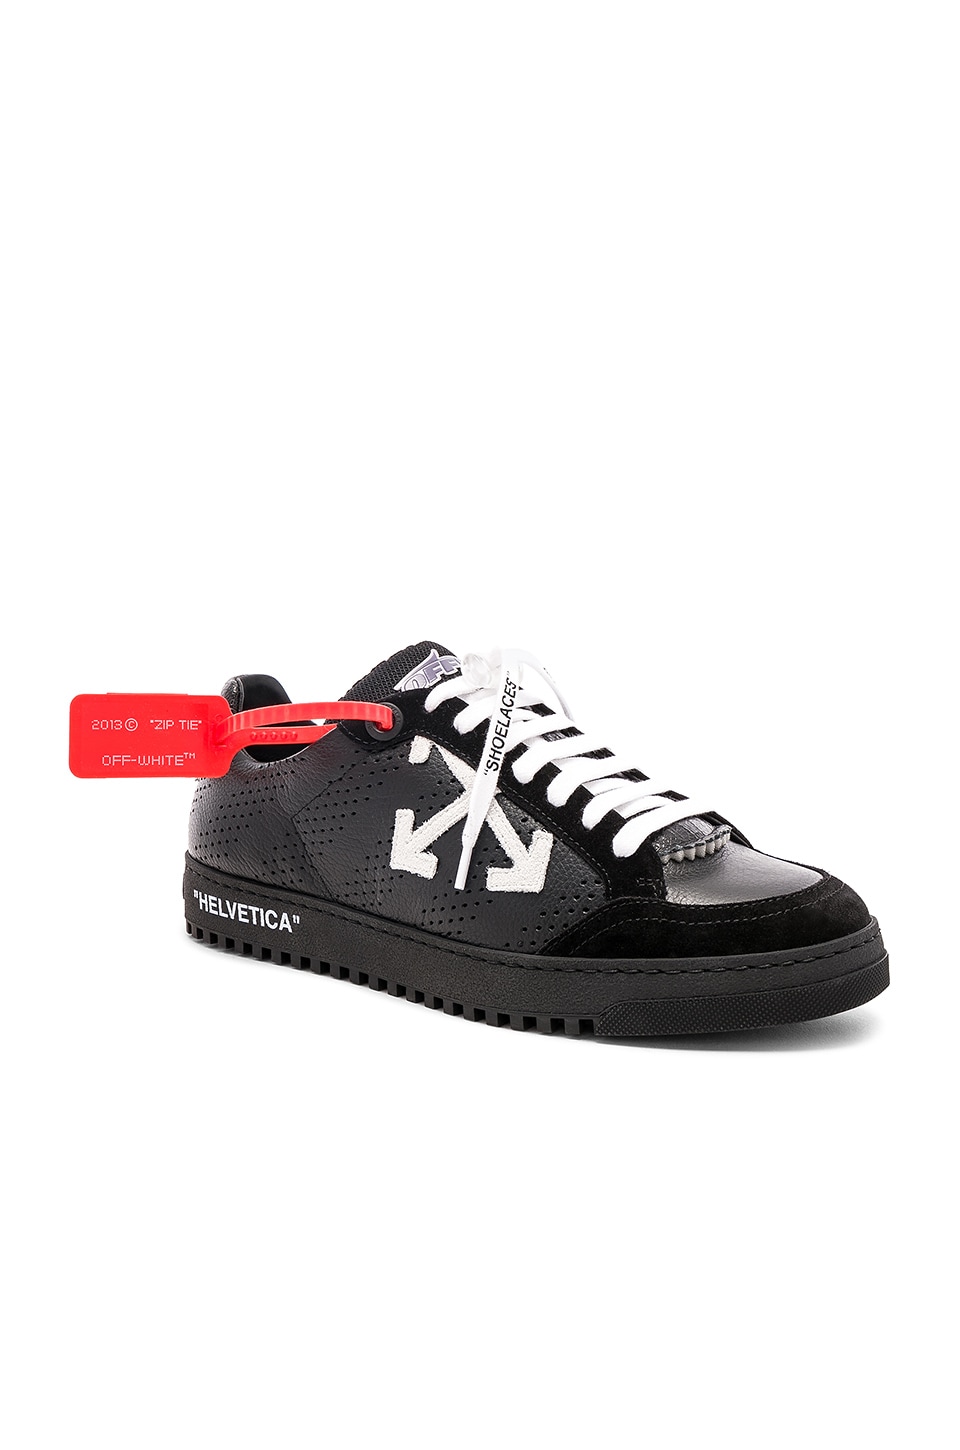 off white low sneakers black